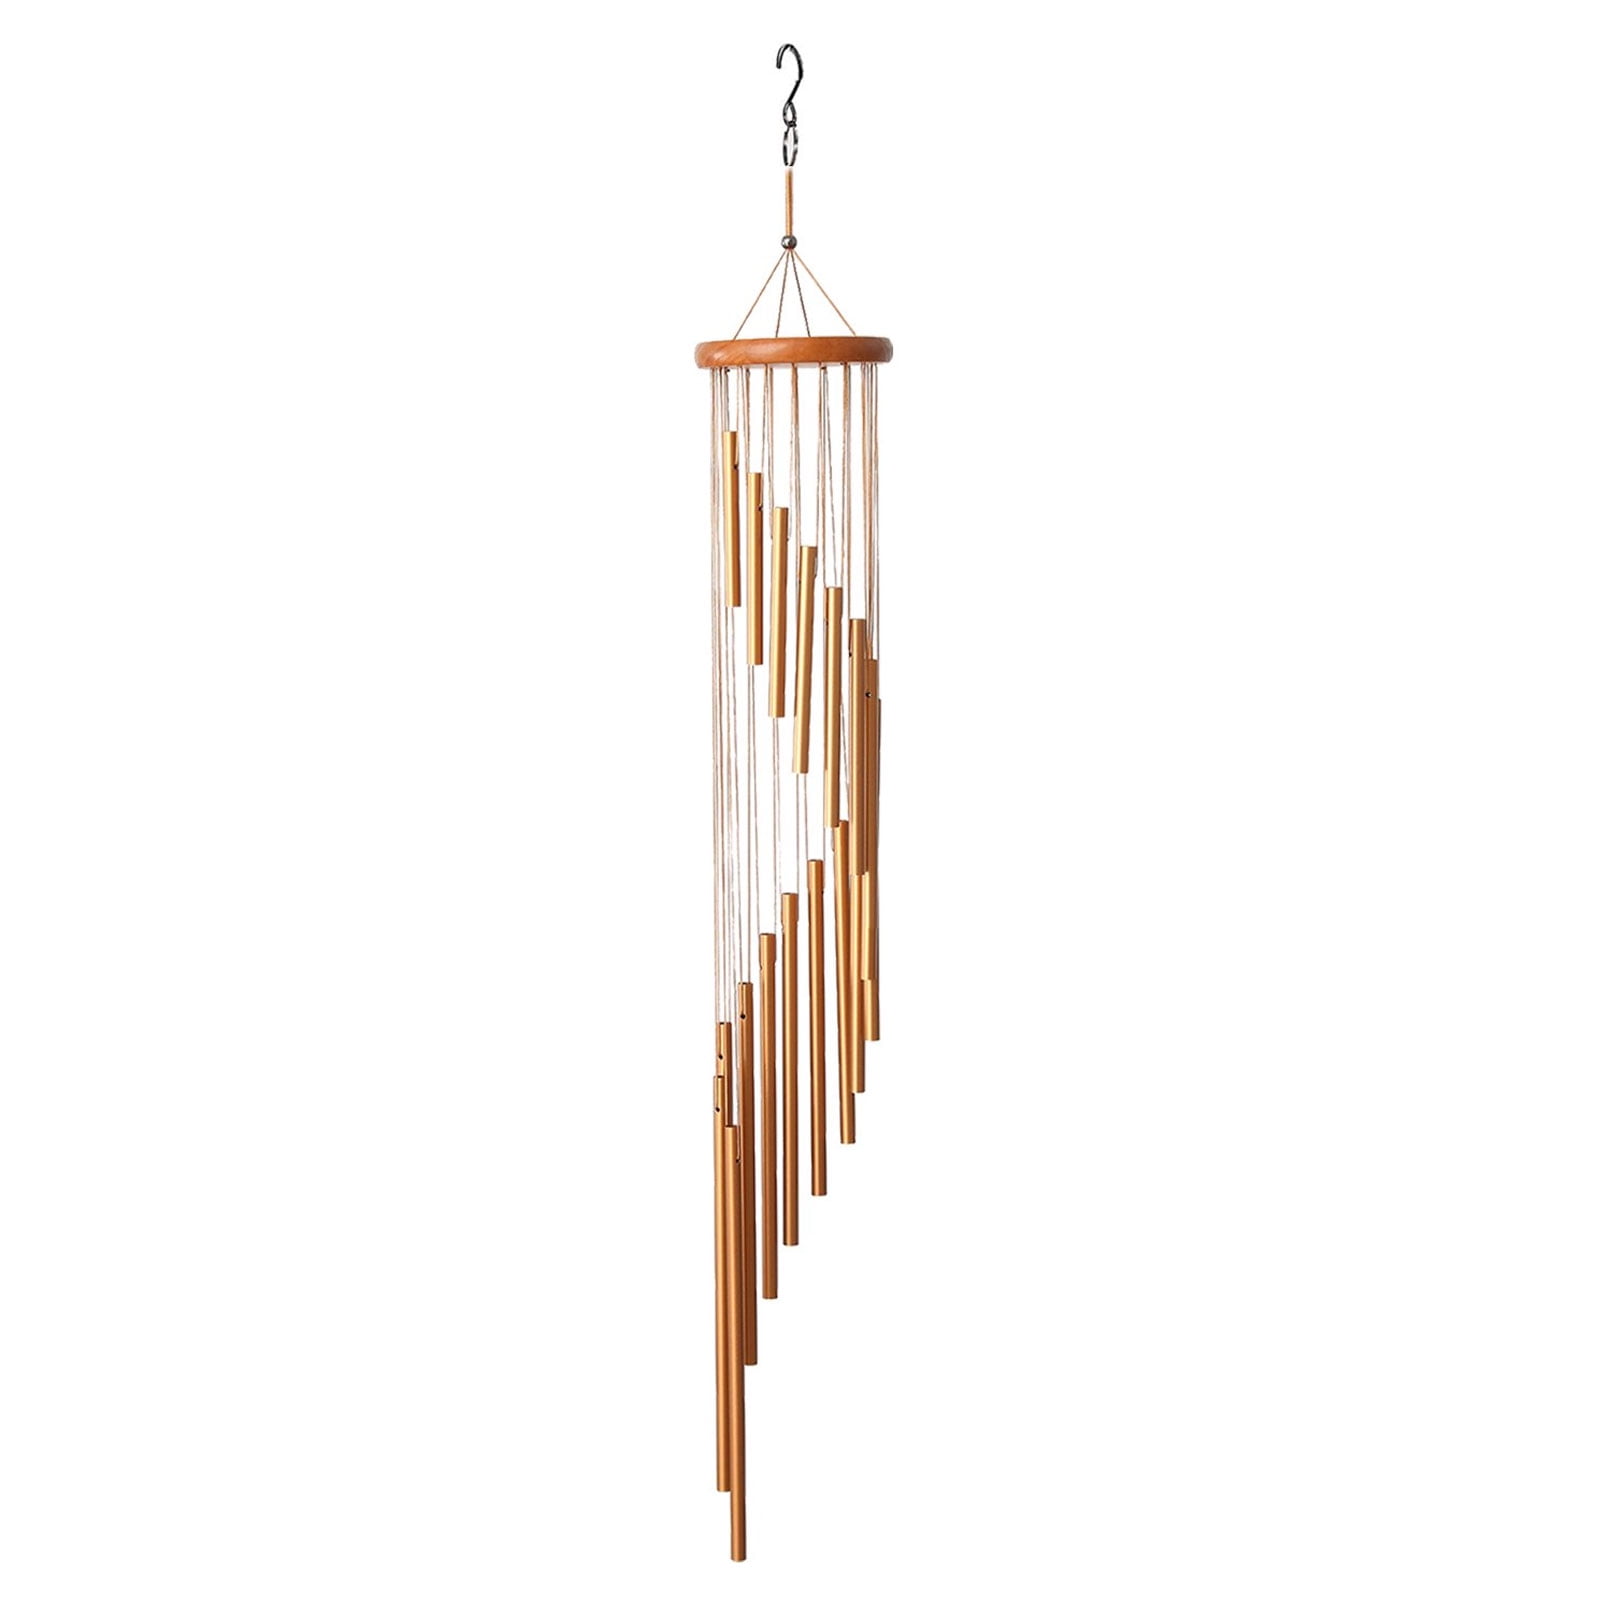 LARGE METAL & WOOD Silver or Copper WIND CHIME Balcony Patio Porch Tree Art Mom 